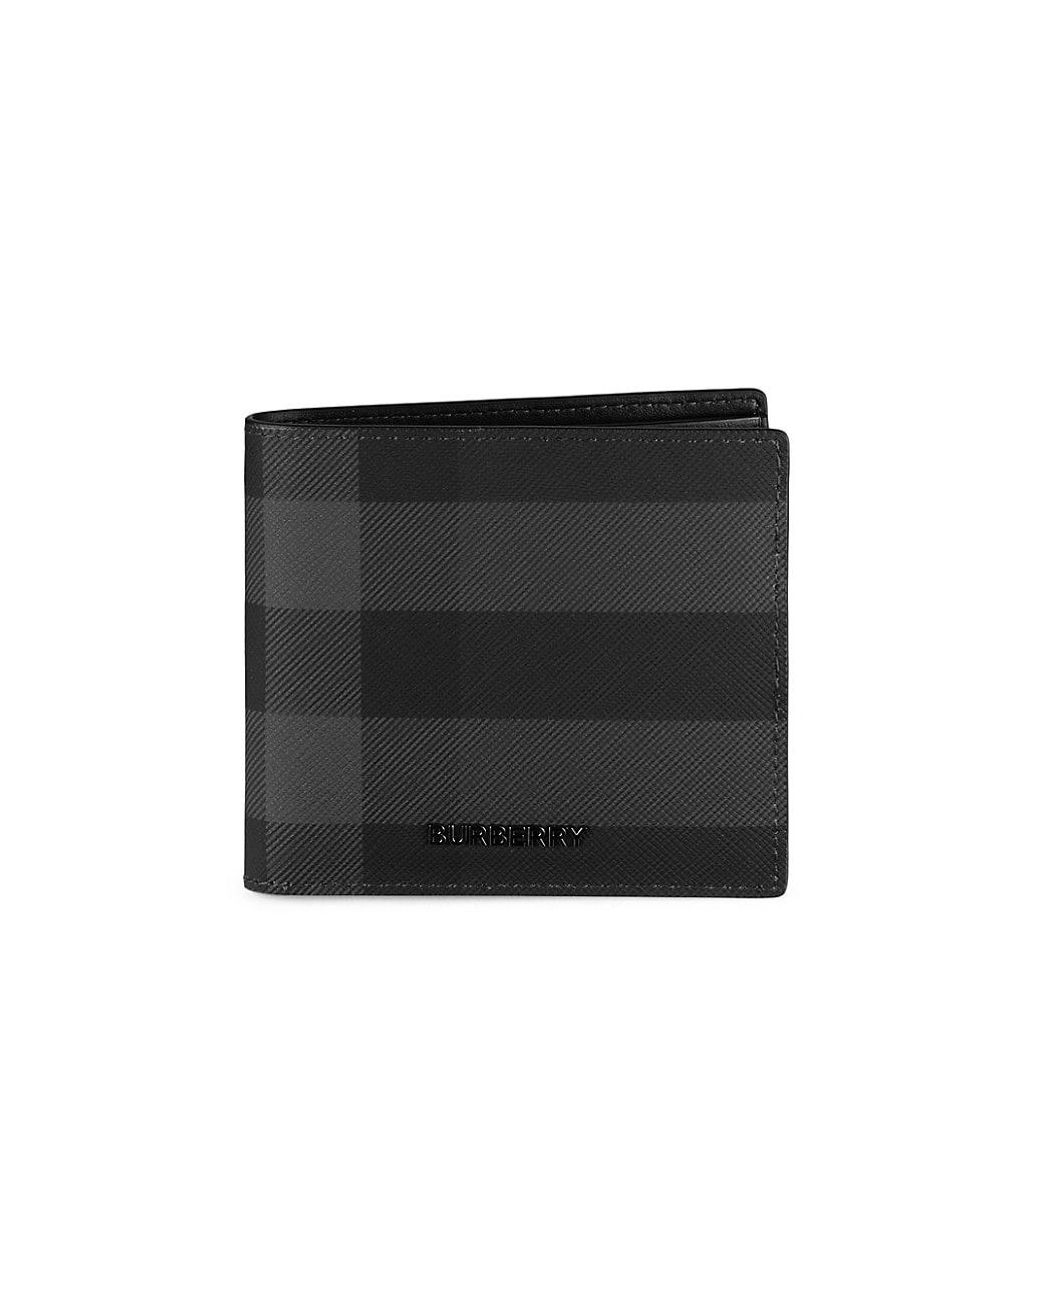 Burberry Check Bifold Wallet in Black for Men | Lyst